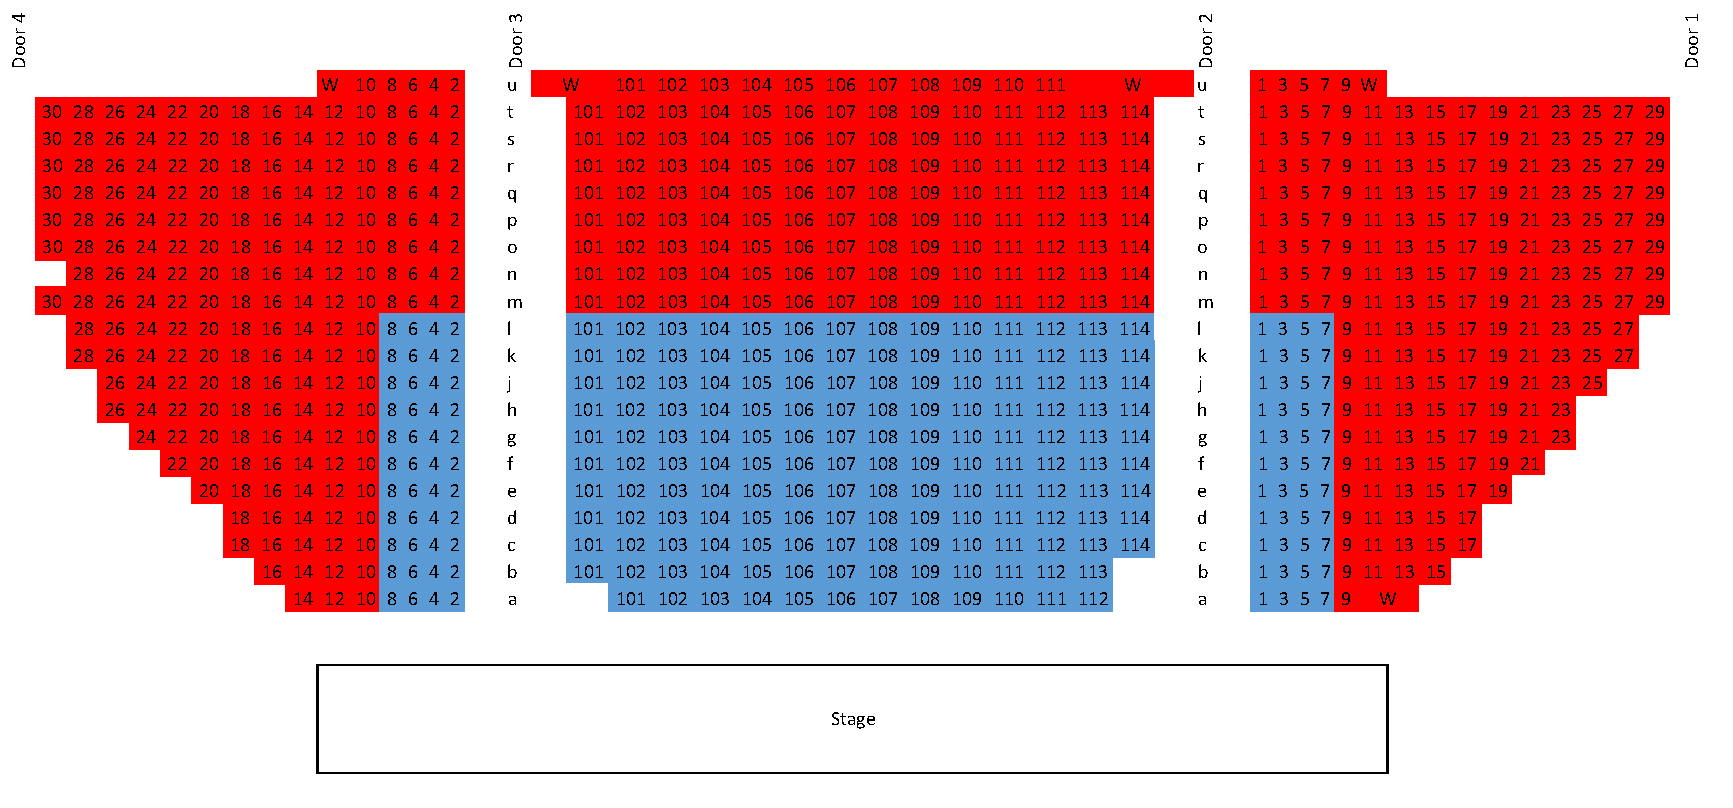 Ppac Seating Chart Updated 2 19 16 Performing Arts Management